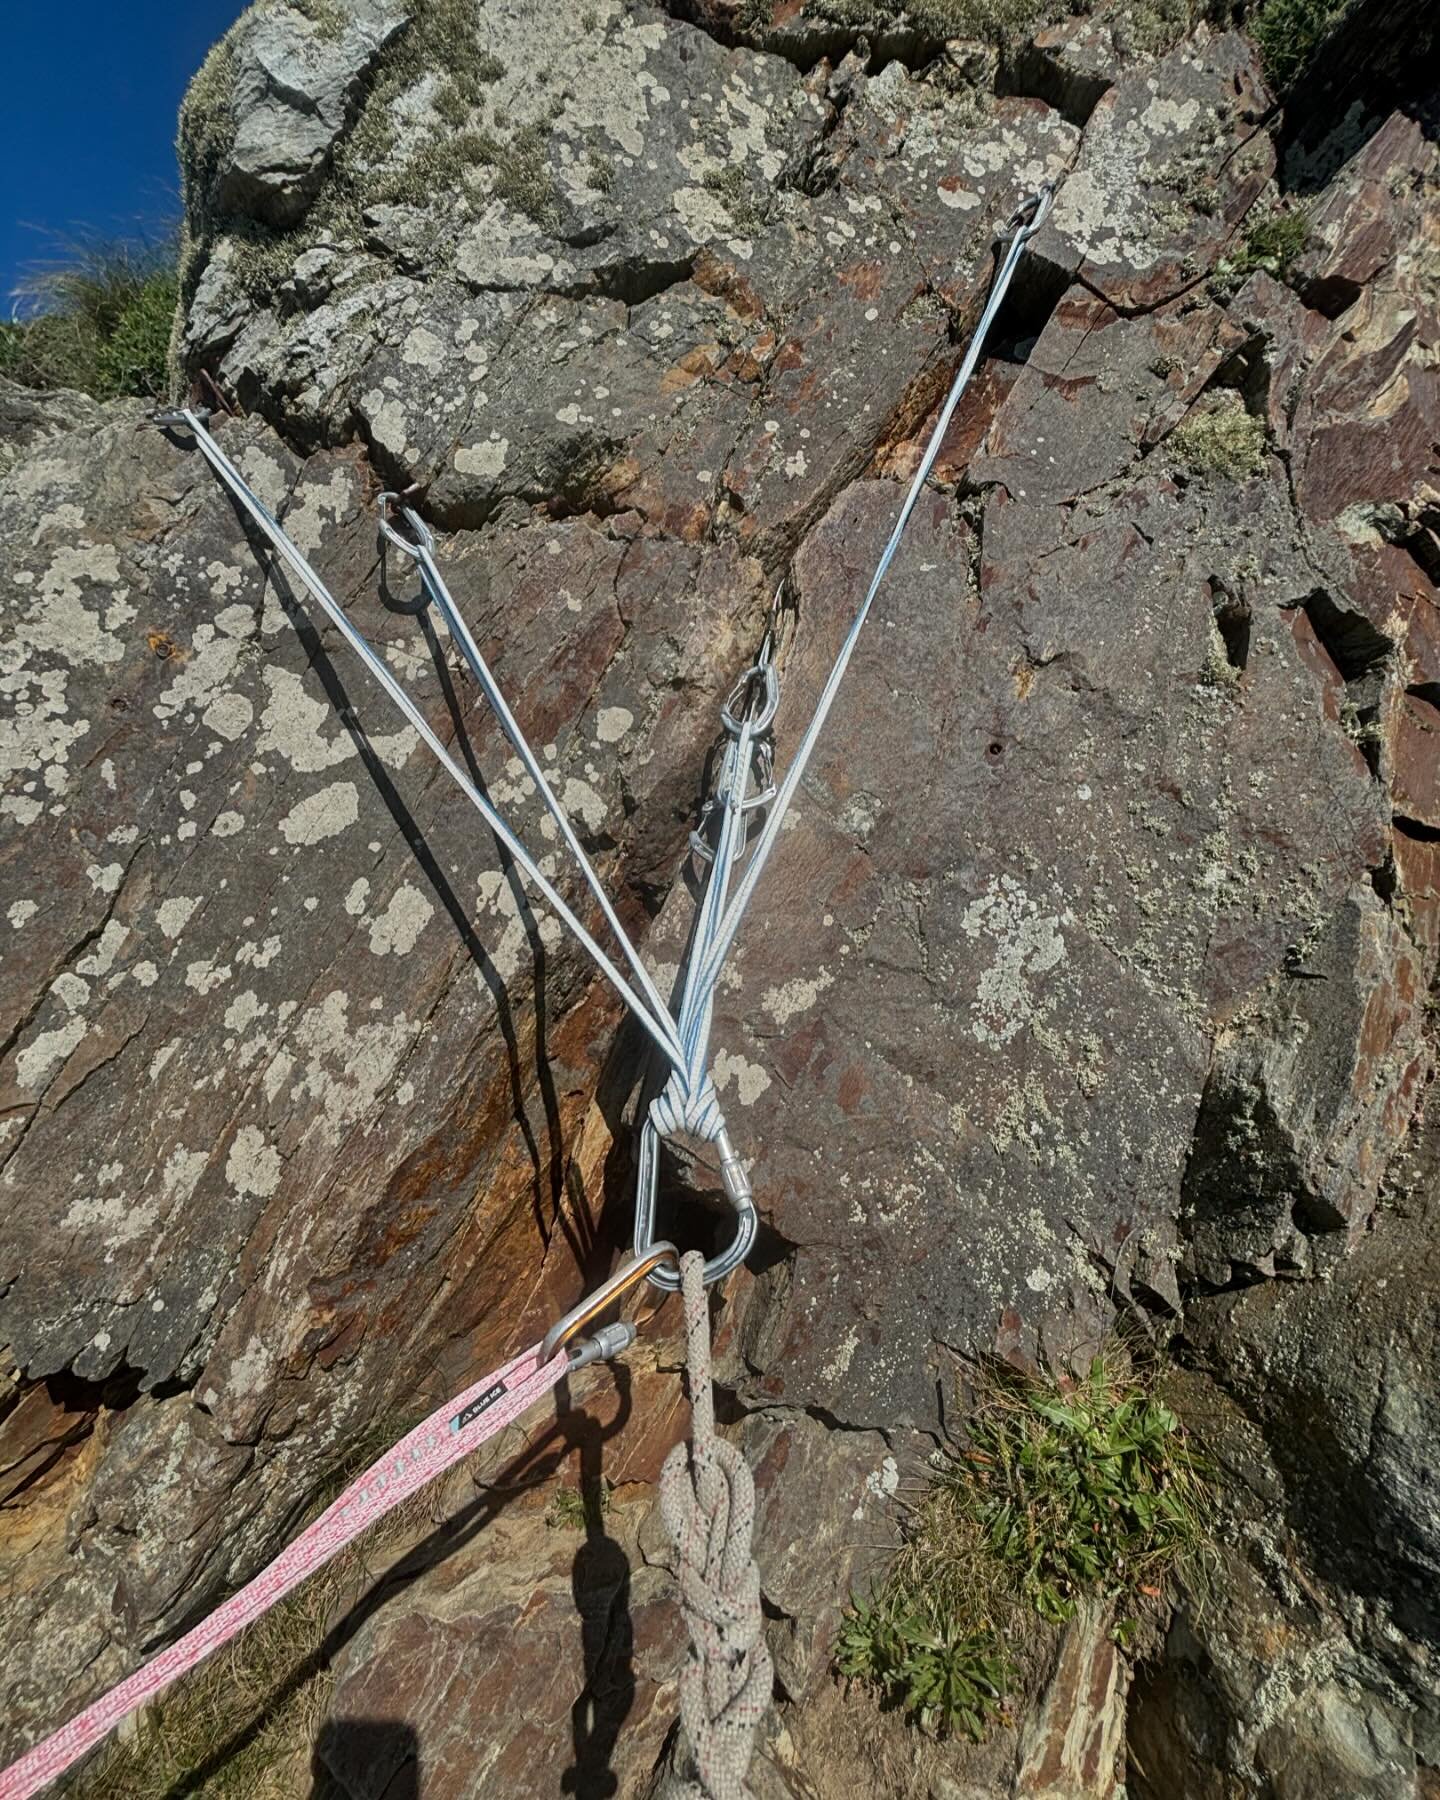 Castell Helen. Never has one abseil produced so many creative anchors. Here are some favourites from over the years. Which ones are mine and which ones wouldn&rsquo;t you want to whip on? 😂😱🤯🤪

(Hint: I always take a 400cm sling and tie at least 